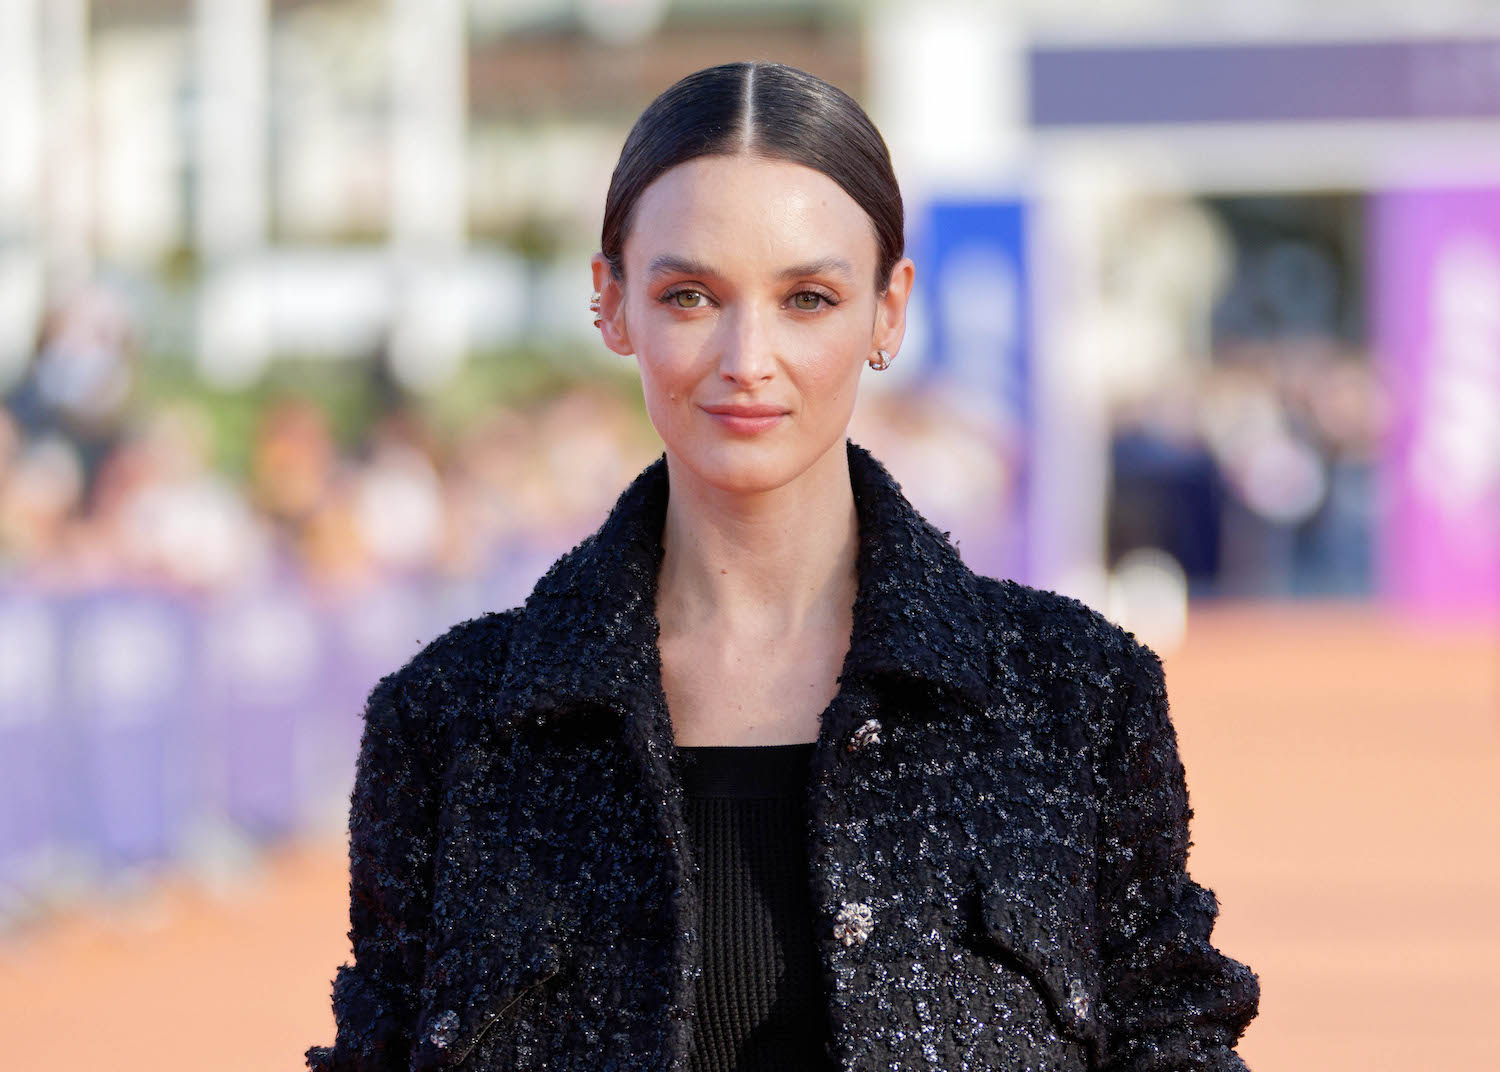 DEAUVILLE, FRANCE - SEPTEMBER 10: Charlotte Le Bon attends the closing Ceremony during the 48th Deauville American Film Festival on September 10, 2022 in Deauville, France. (Photo by Sylvain Lefevre/WireImage)